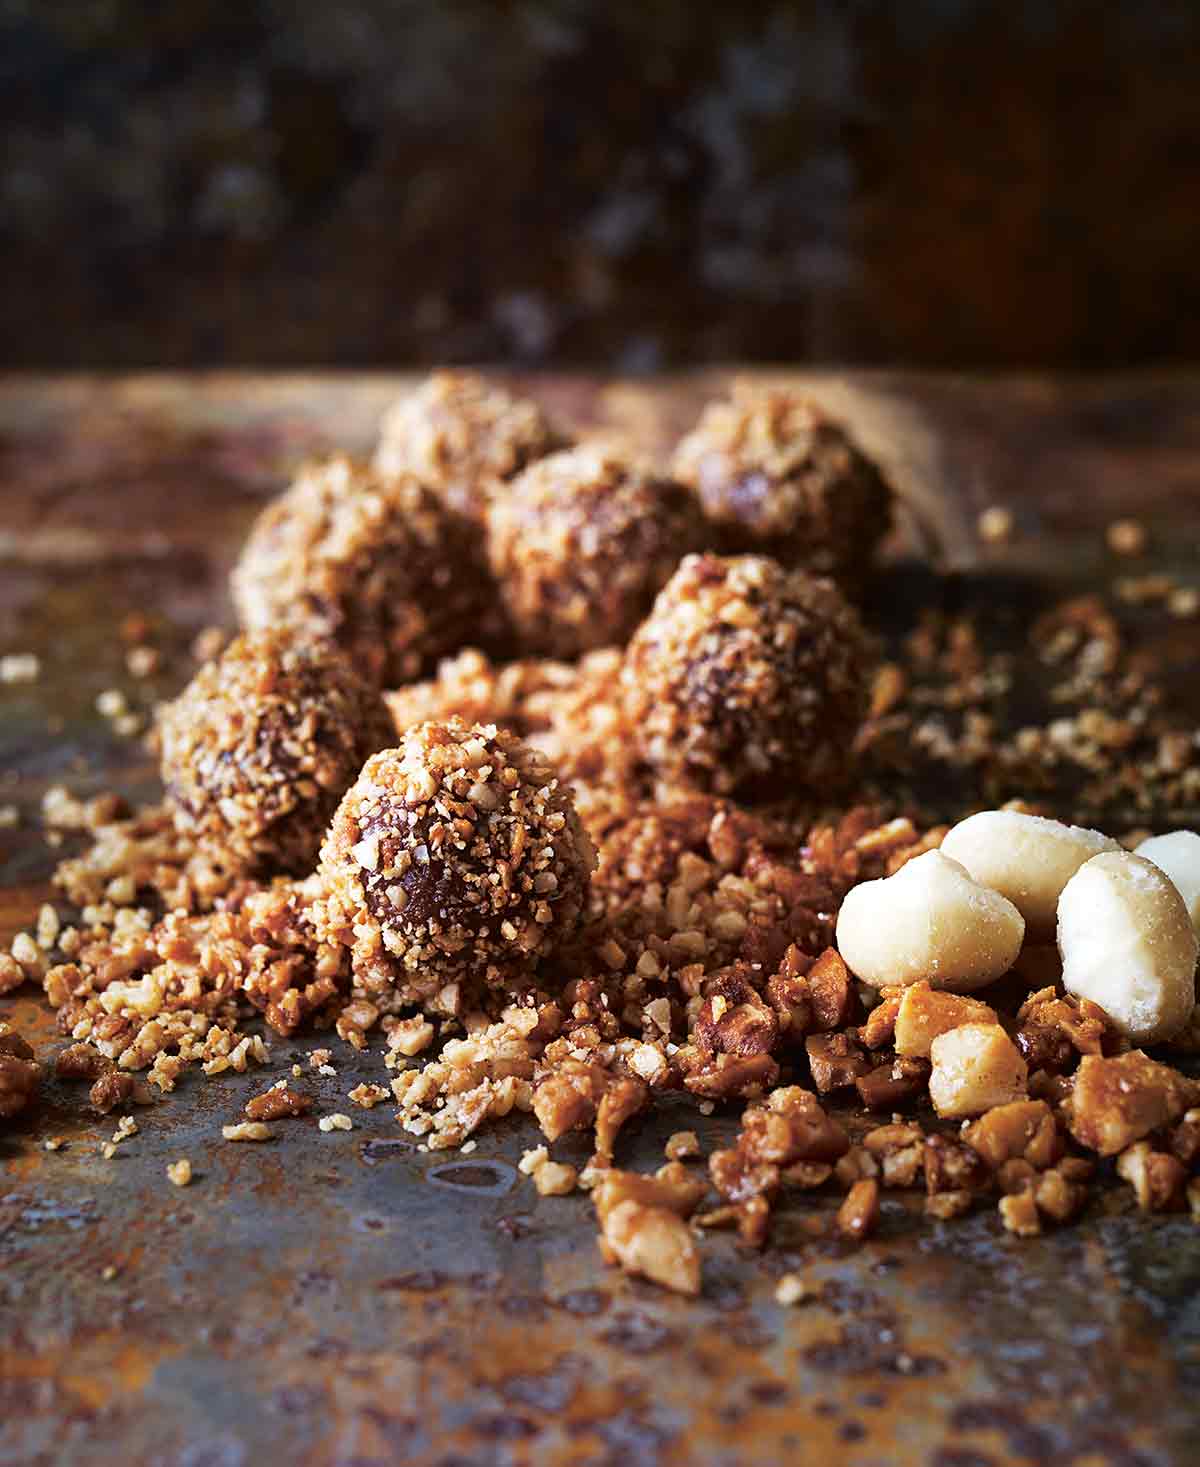 Seven milk chocolate truffles in a pile of candied macadamia nuts.